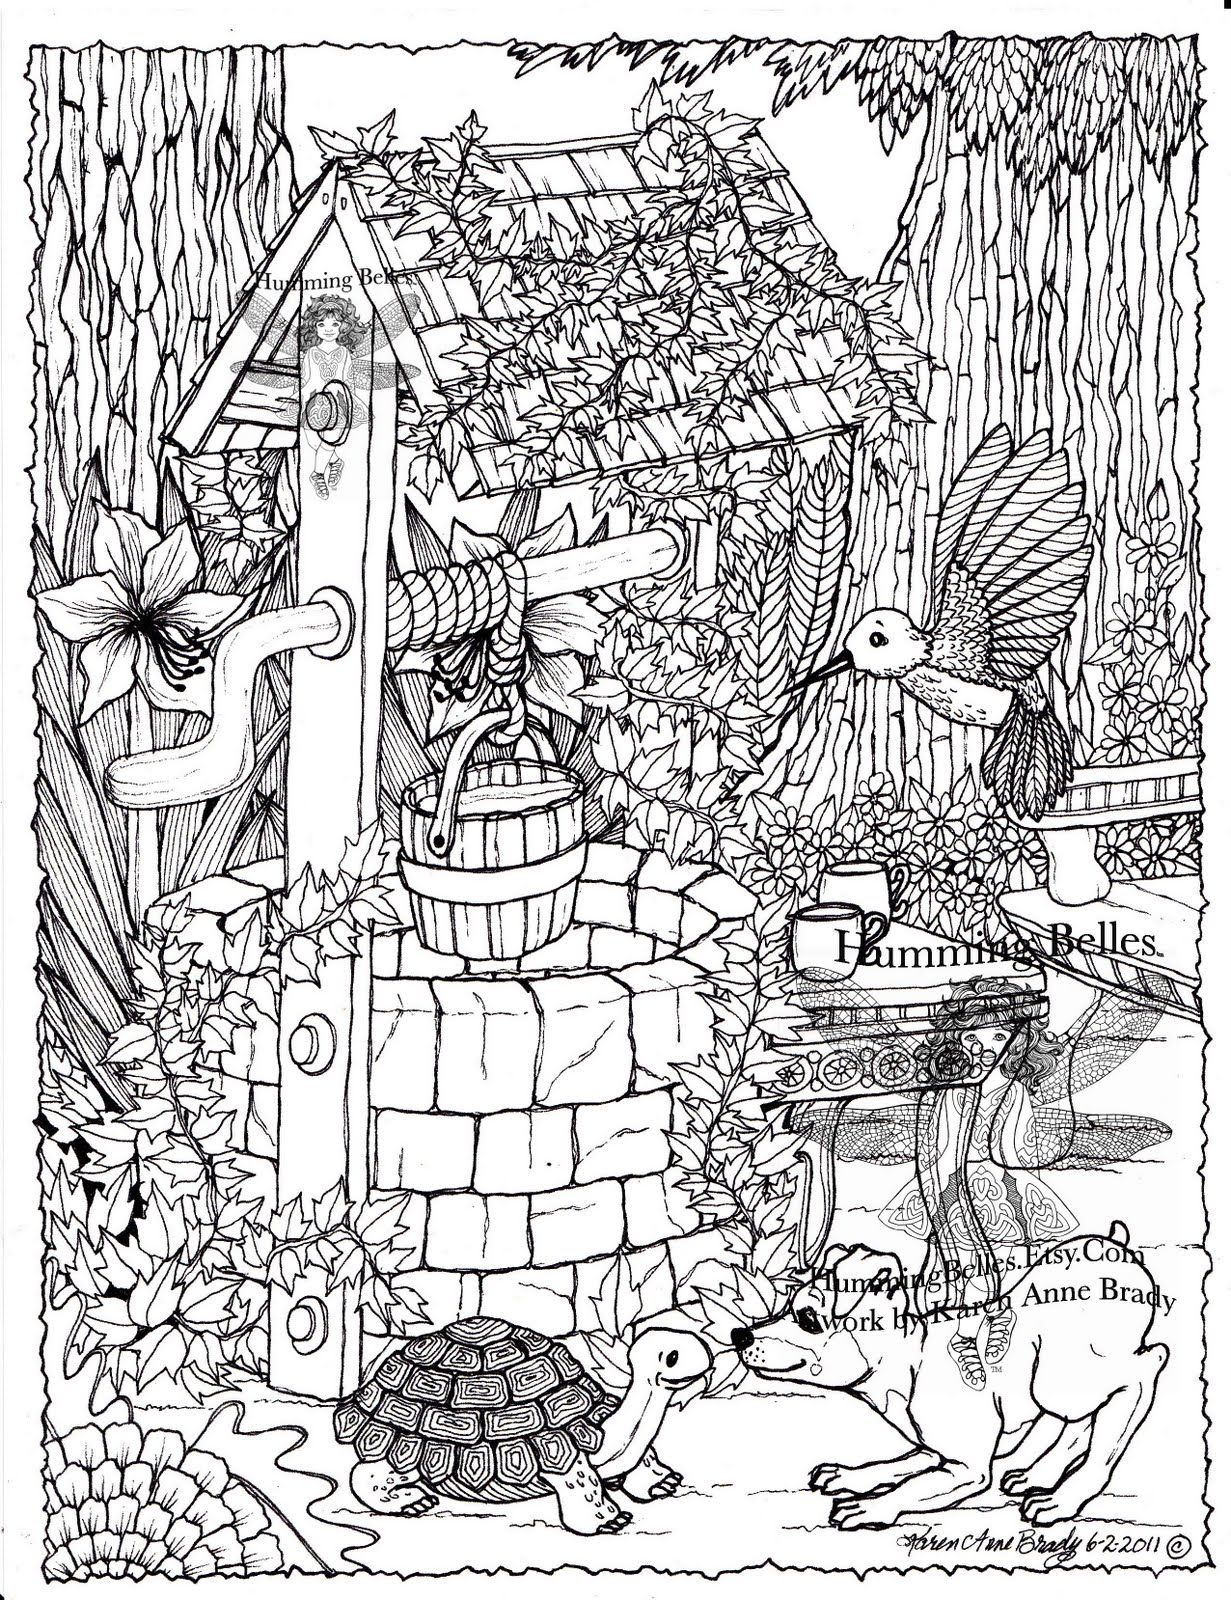 Humming Belles: Humming Belles Coloring Pages